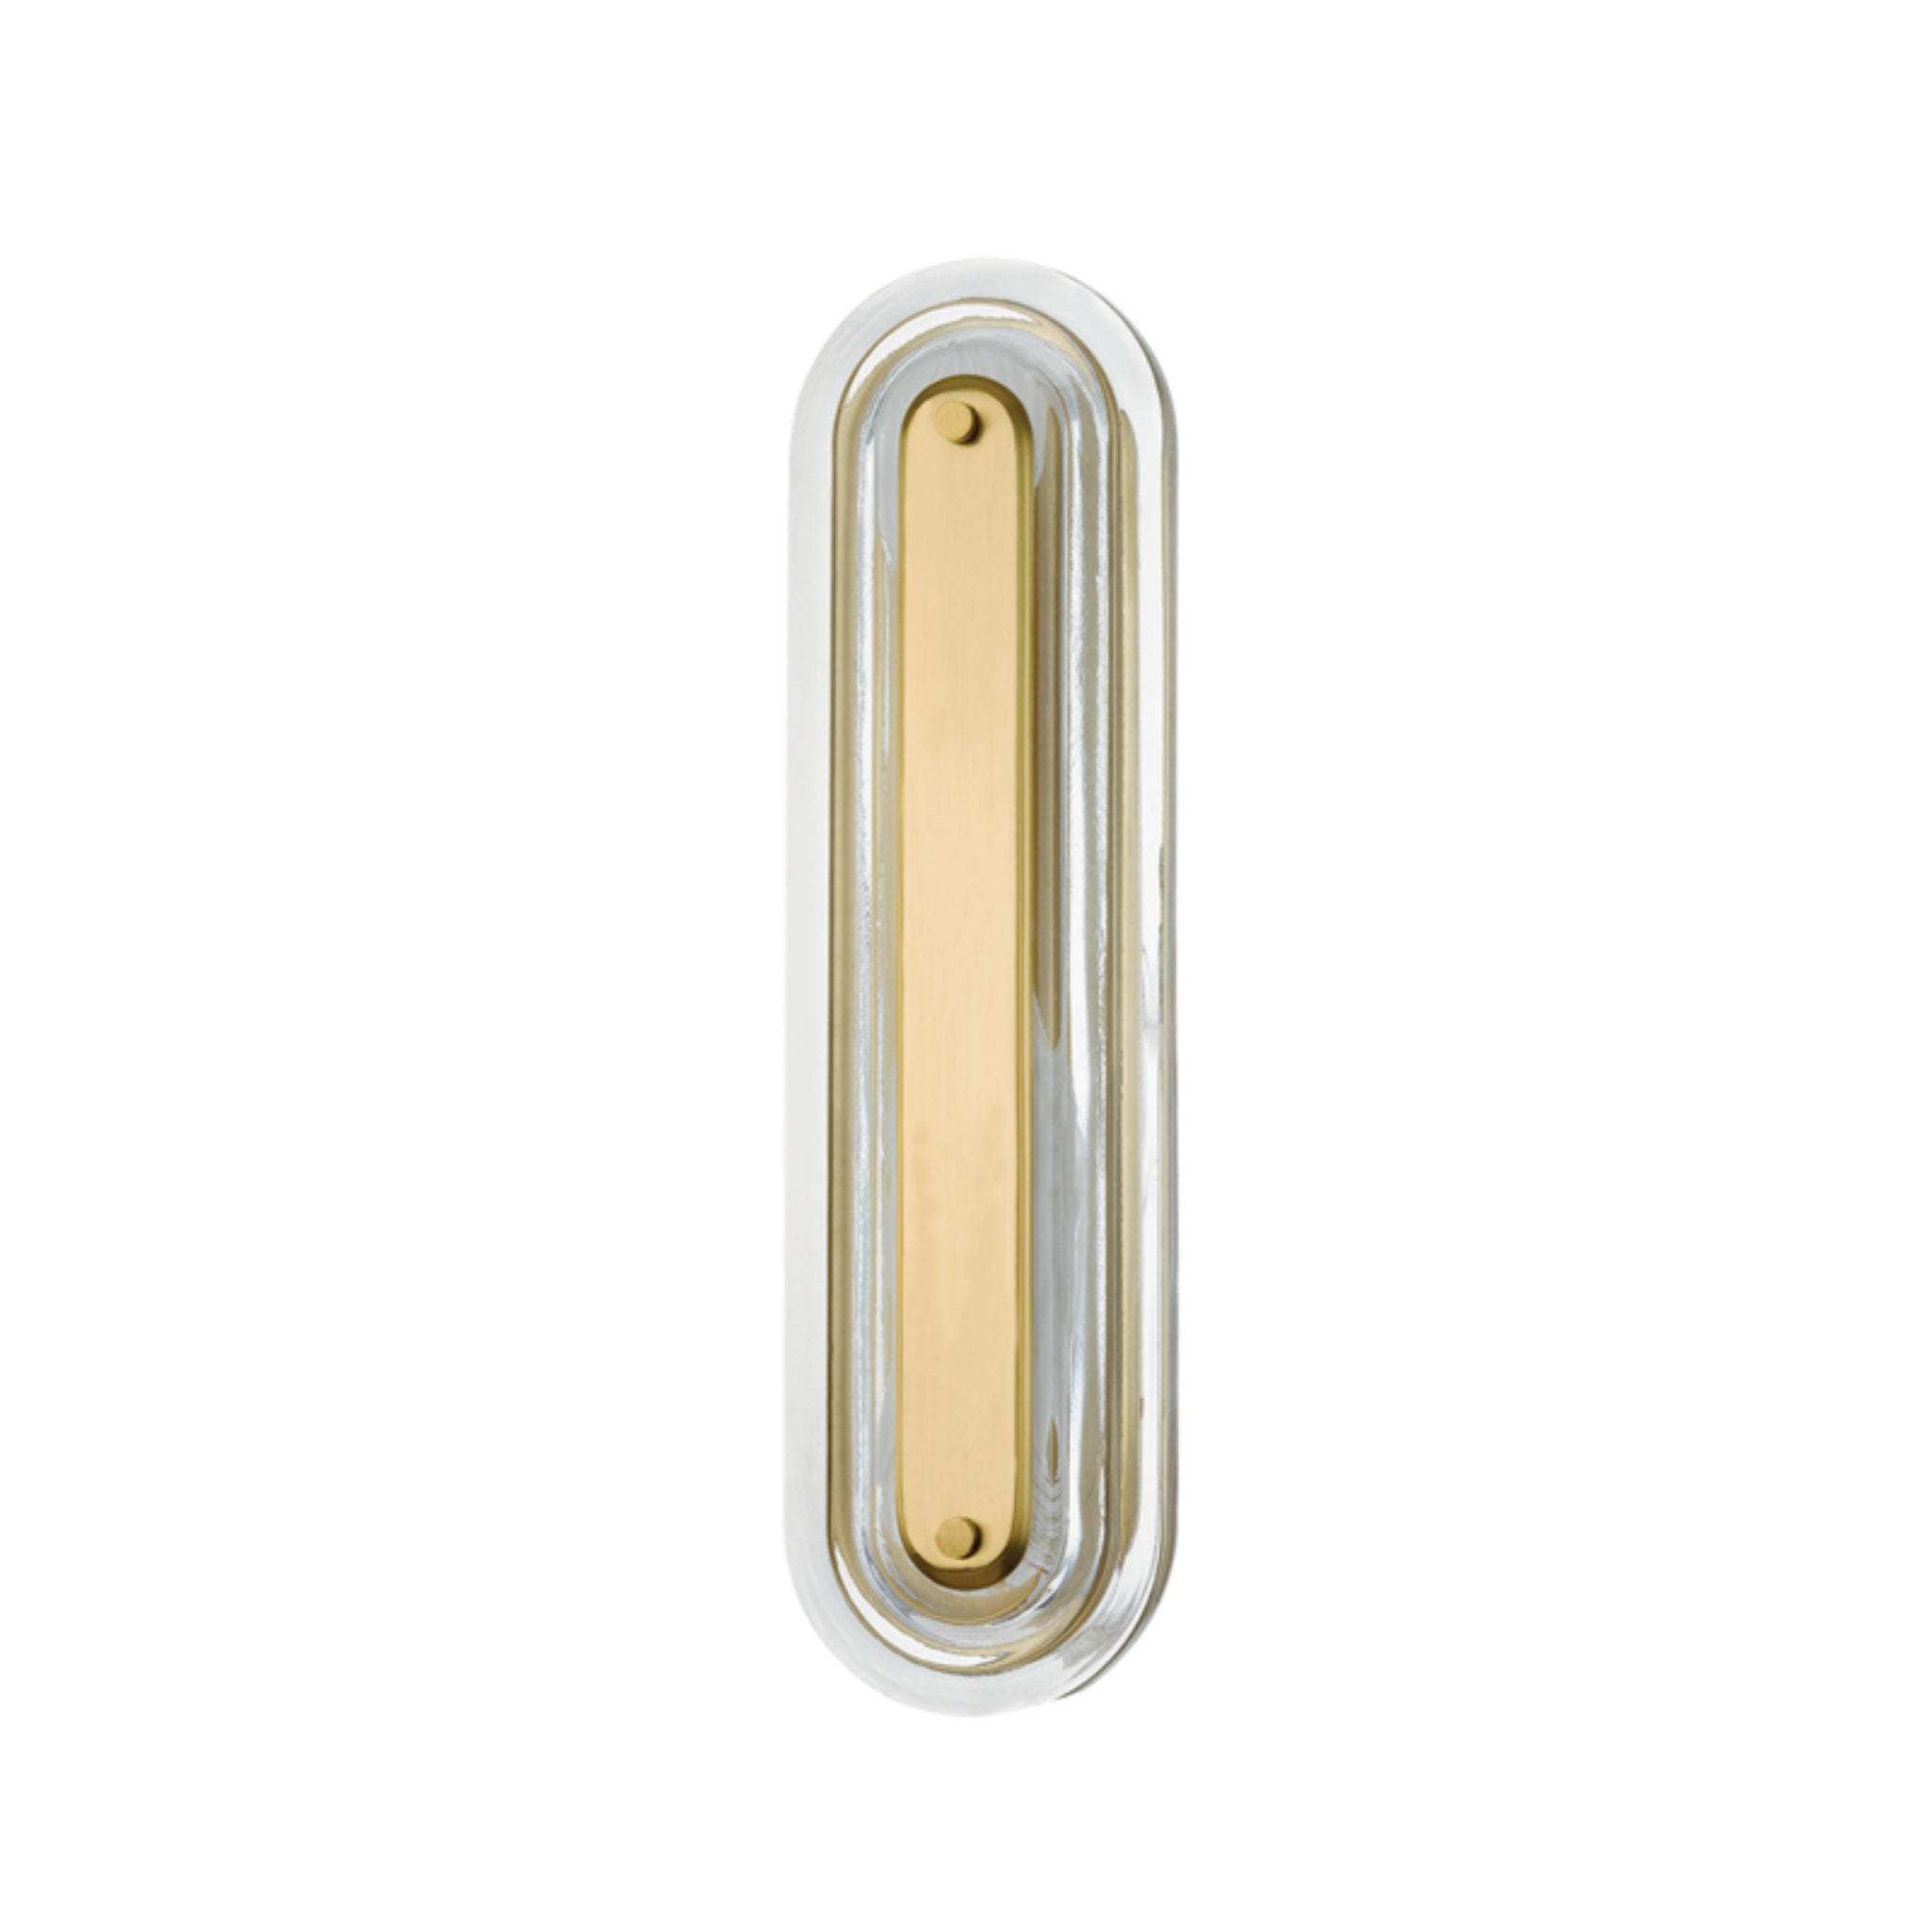 Litton 1 Light Wall Sconce in Aged Brass by Pembrooke & Ives